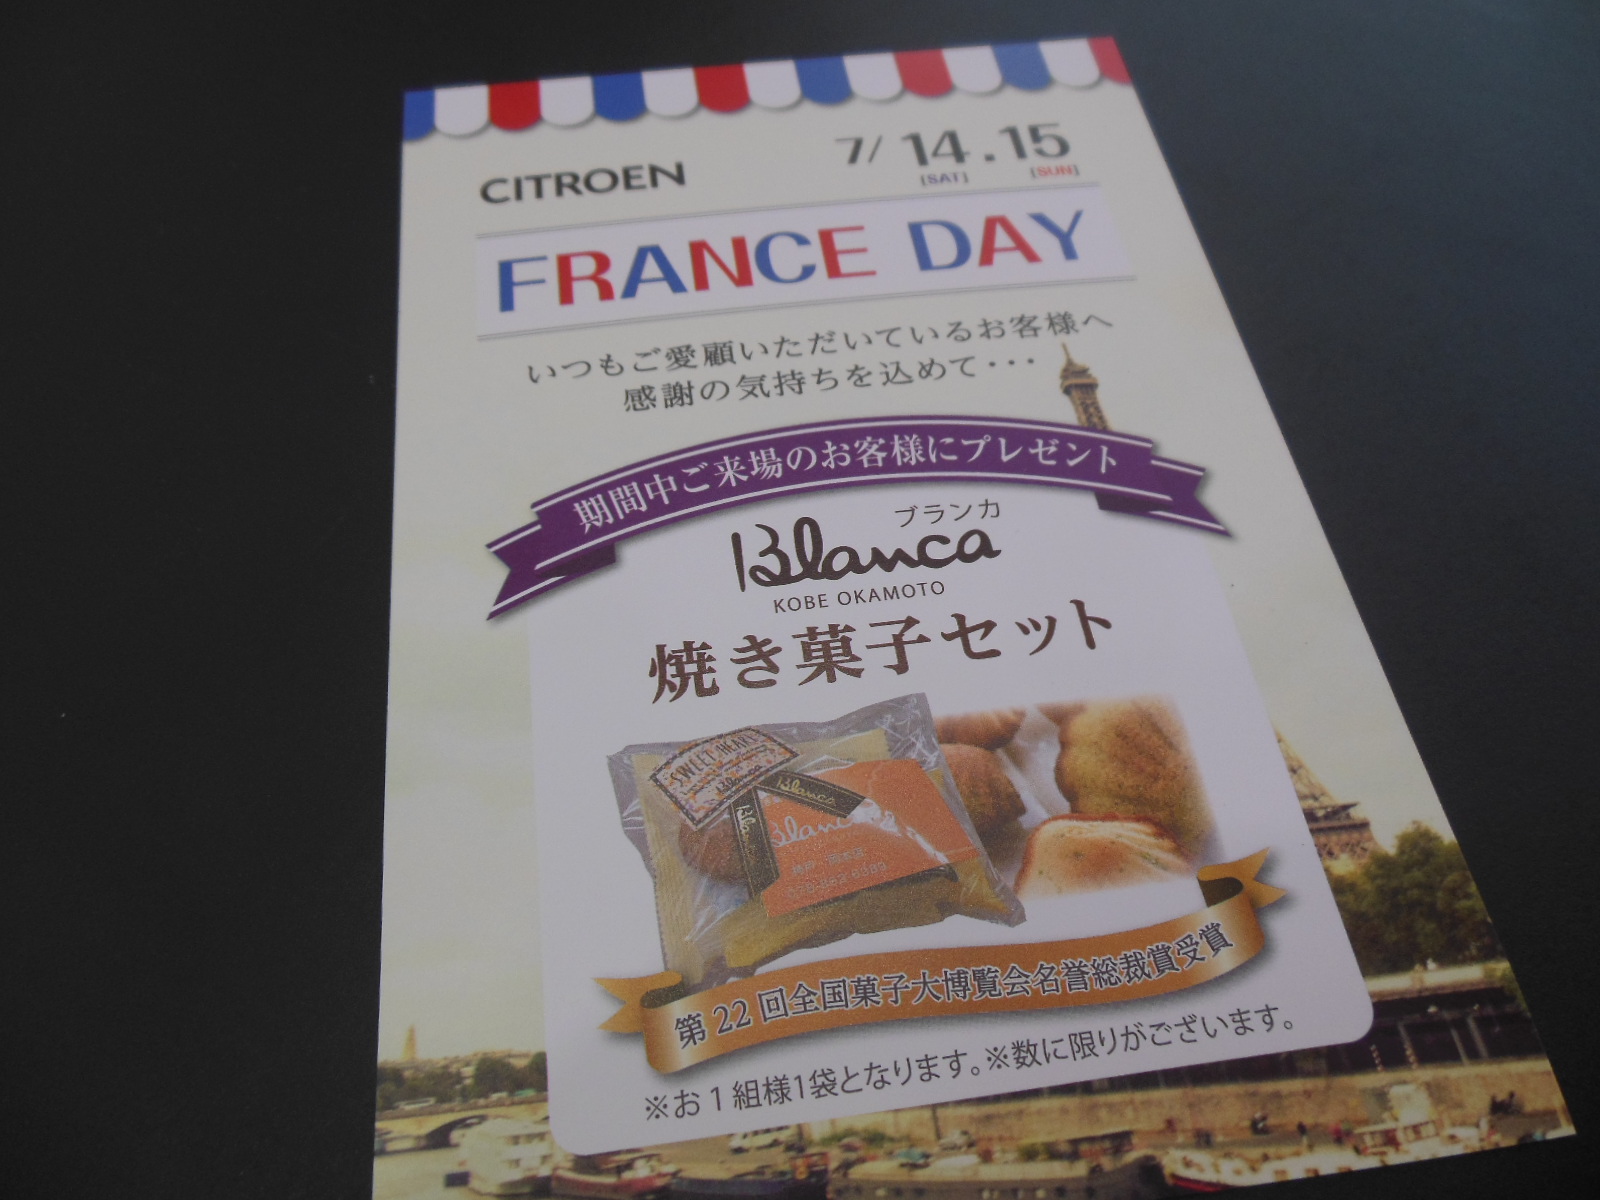 FRANCE DAY